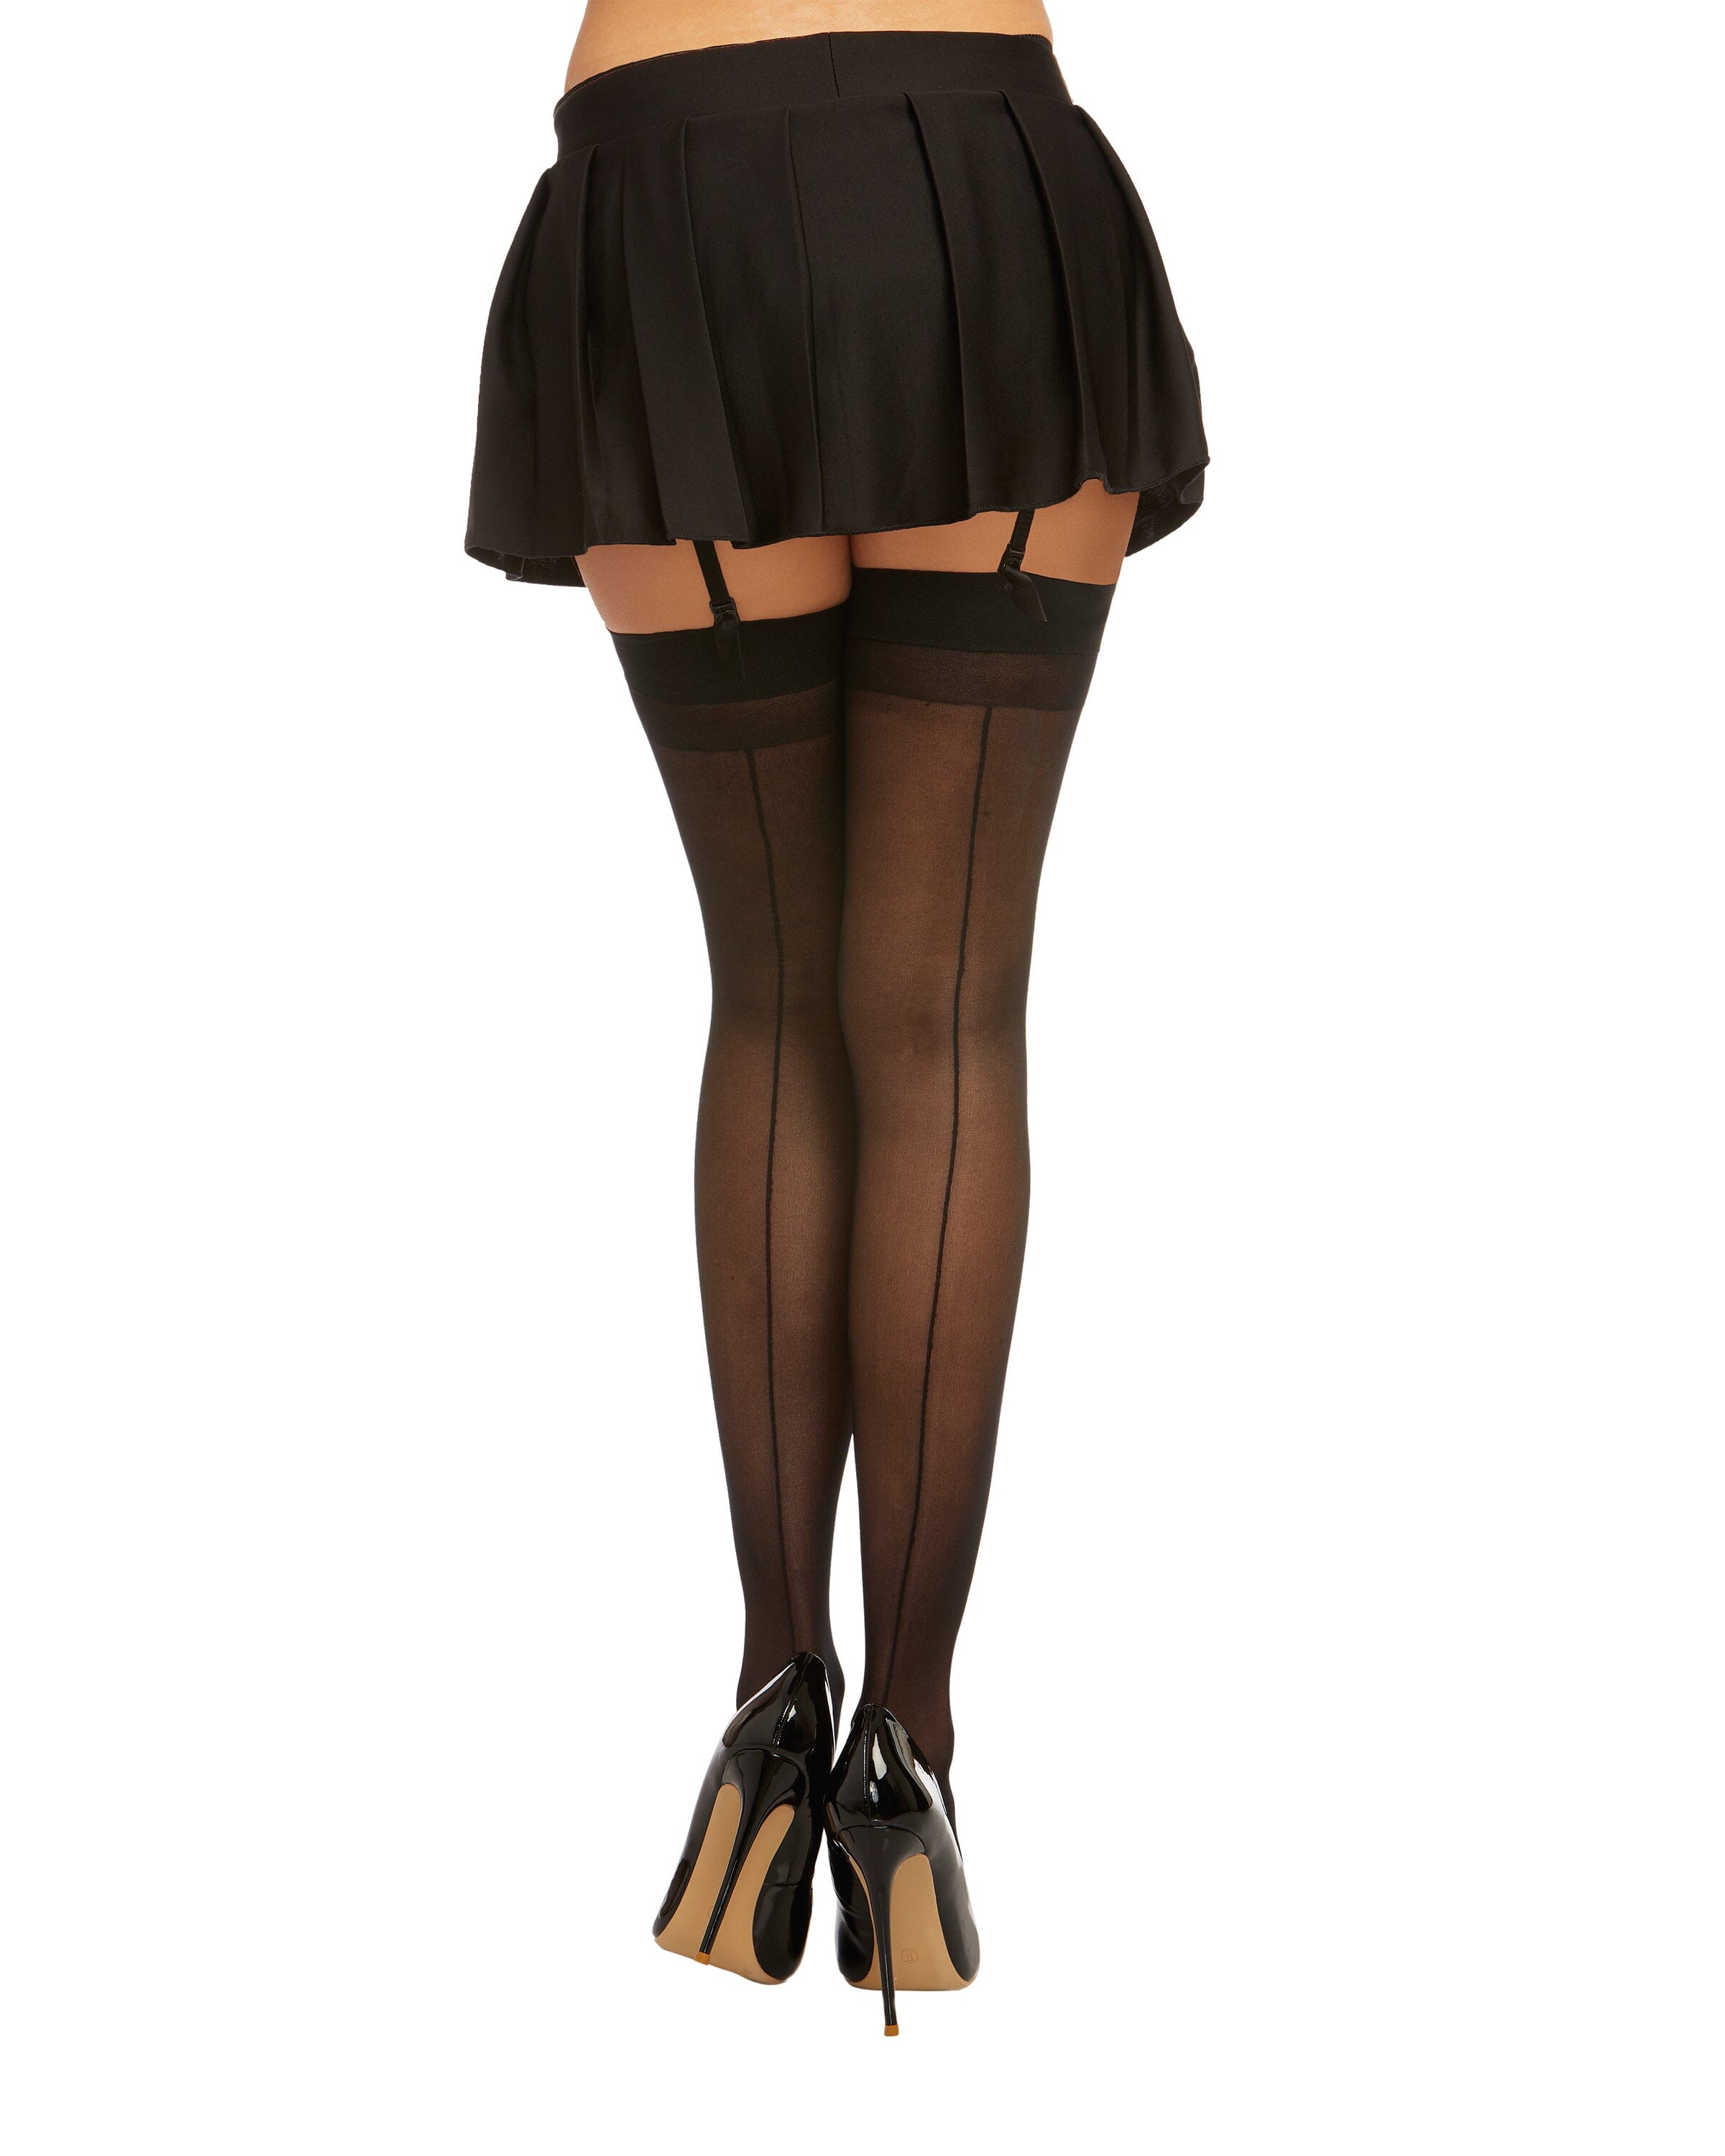 Sheer Thigh Highs with Back Seam Thigh Highs Dreamgirl International 